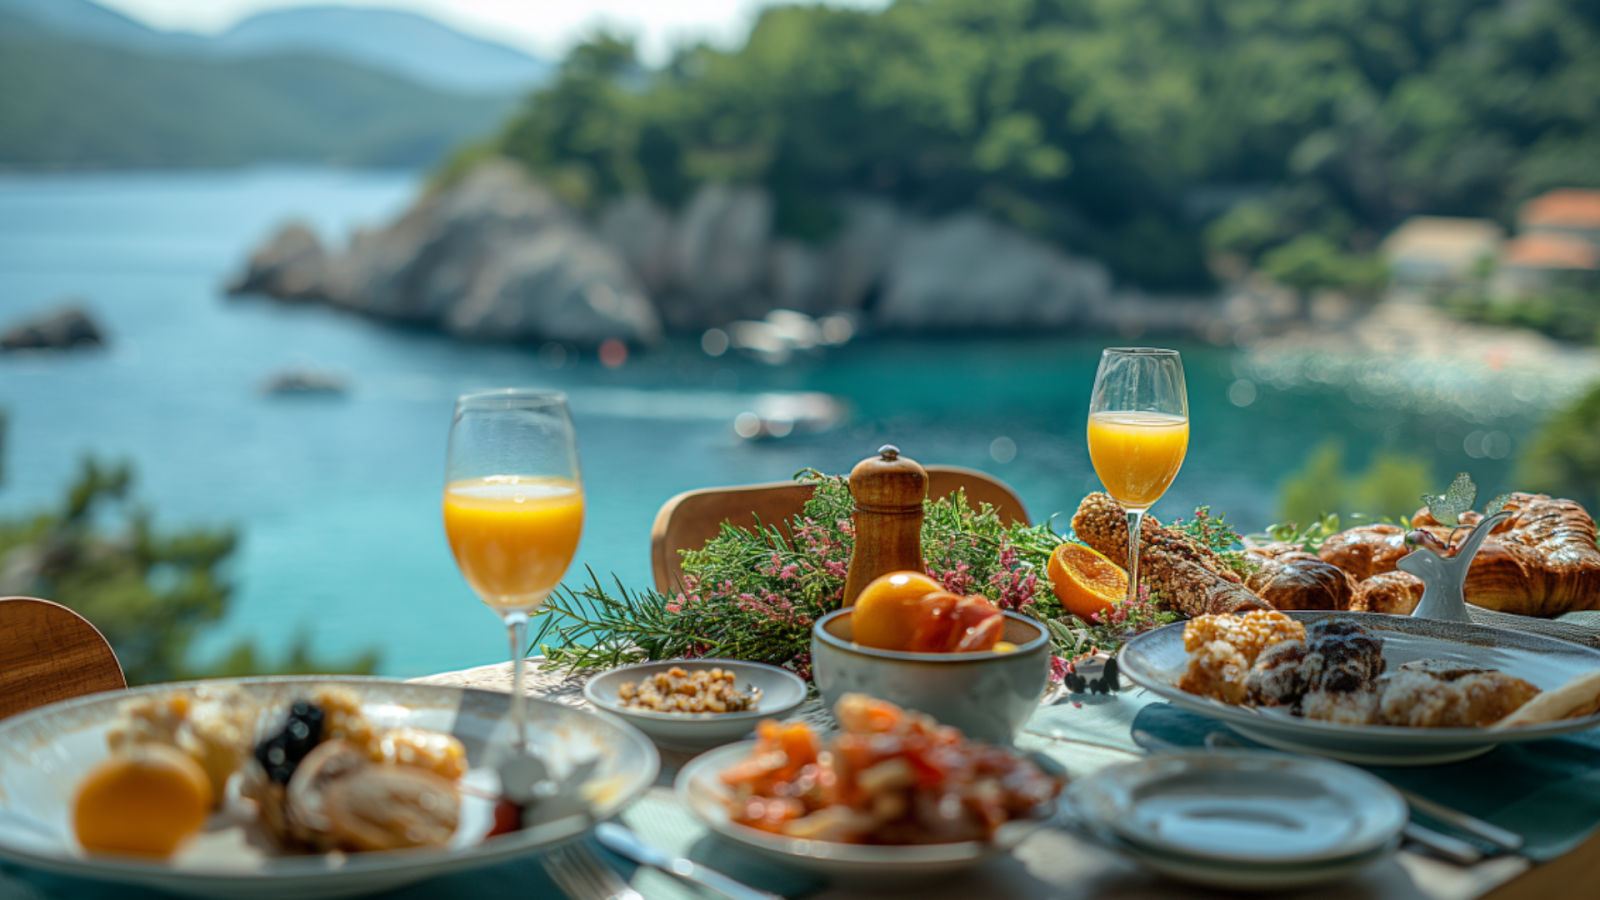 Luxurious breakfast setting on a balcony in Hvar, Croatia, with a view of azure waters and sophisticated table decor.